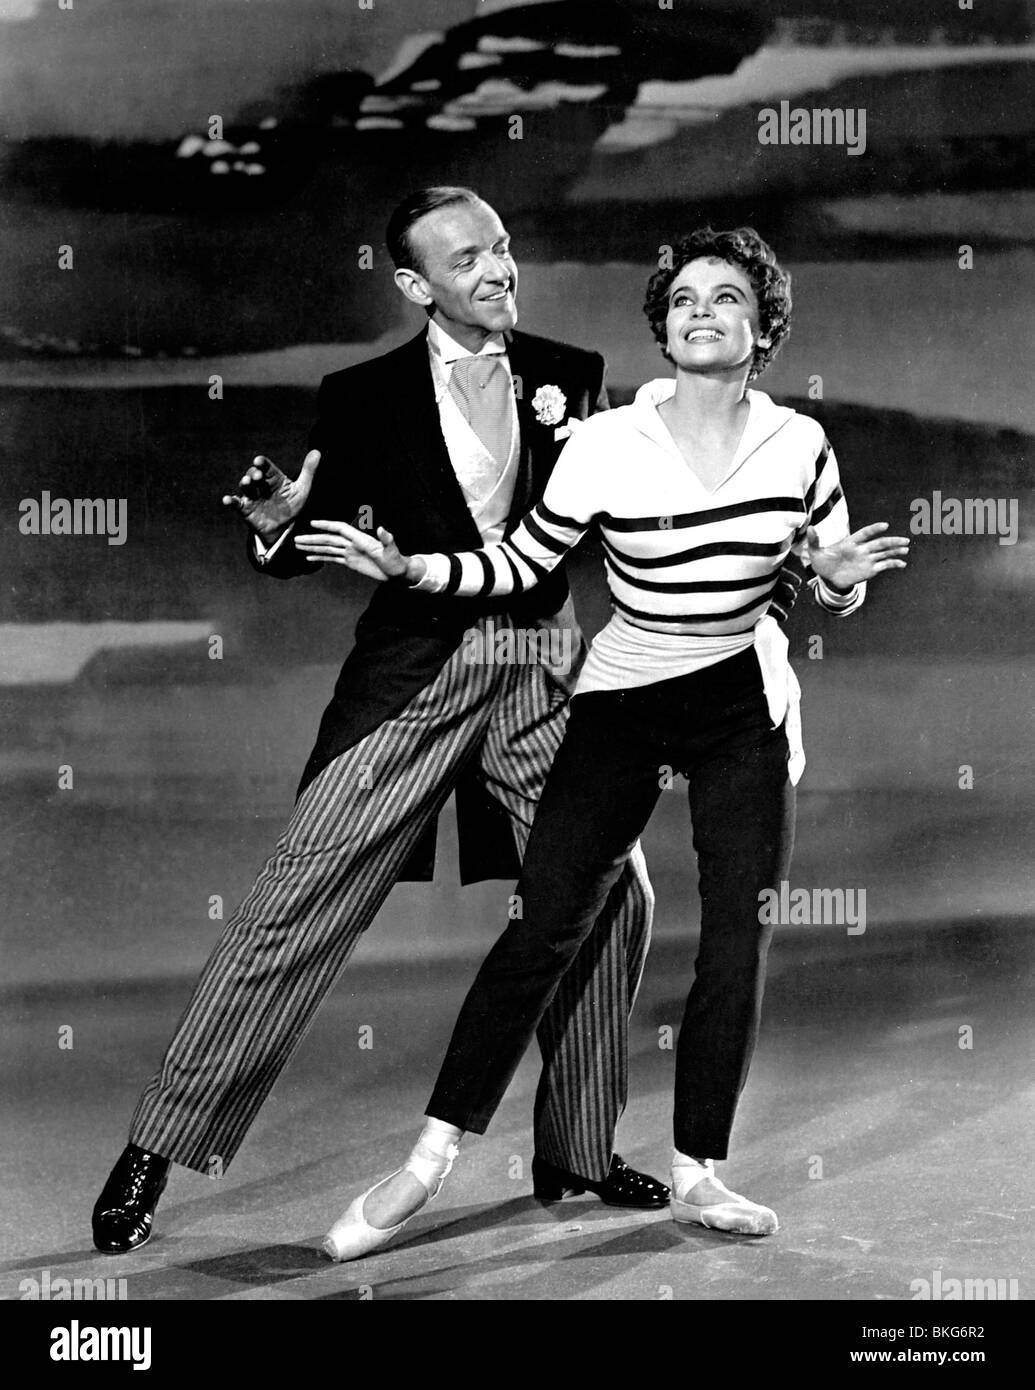 DADDY LONG LEGS (1955) FRED ASTAIRE, LESLIE CARON DLL 002 P Stock Photo